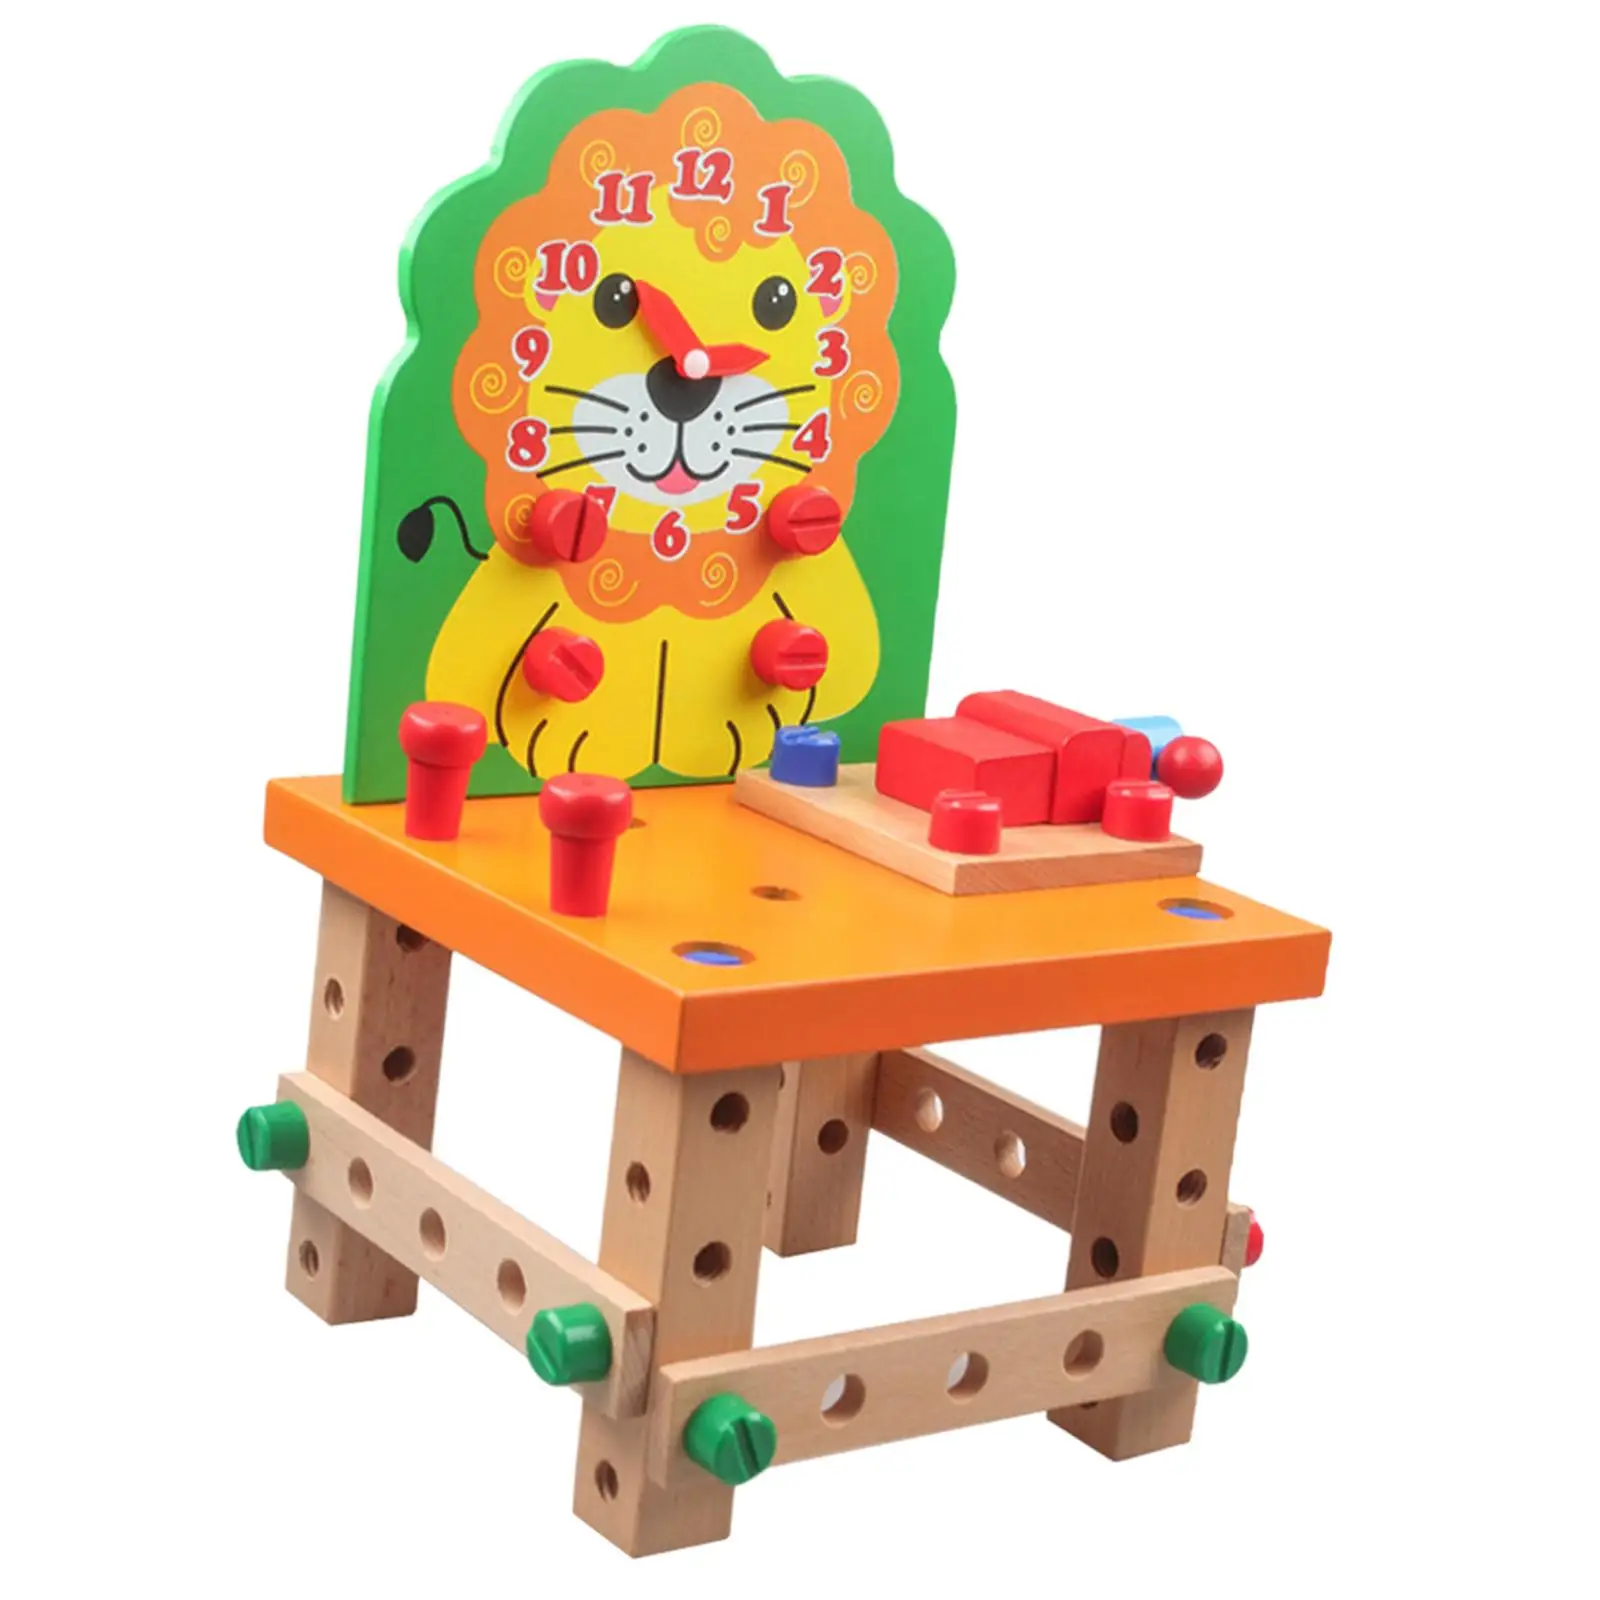 Wooden Assembling Chair Montessori Toys Nuts and Bolts Toy for Children